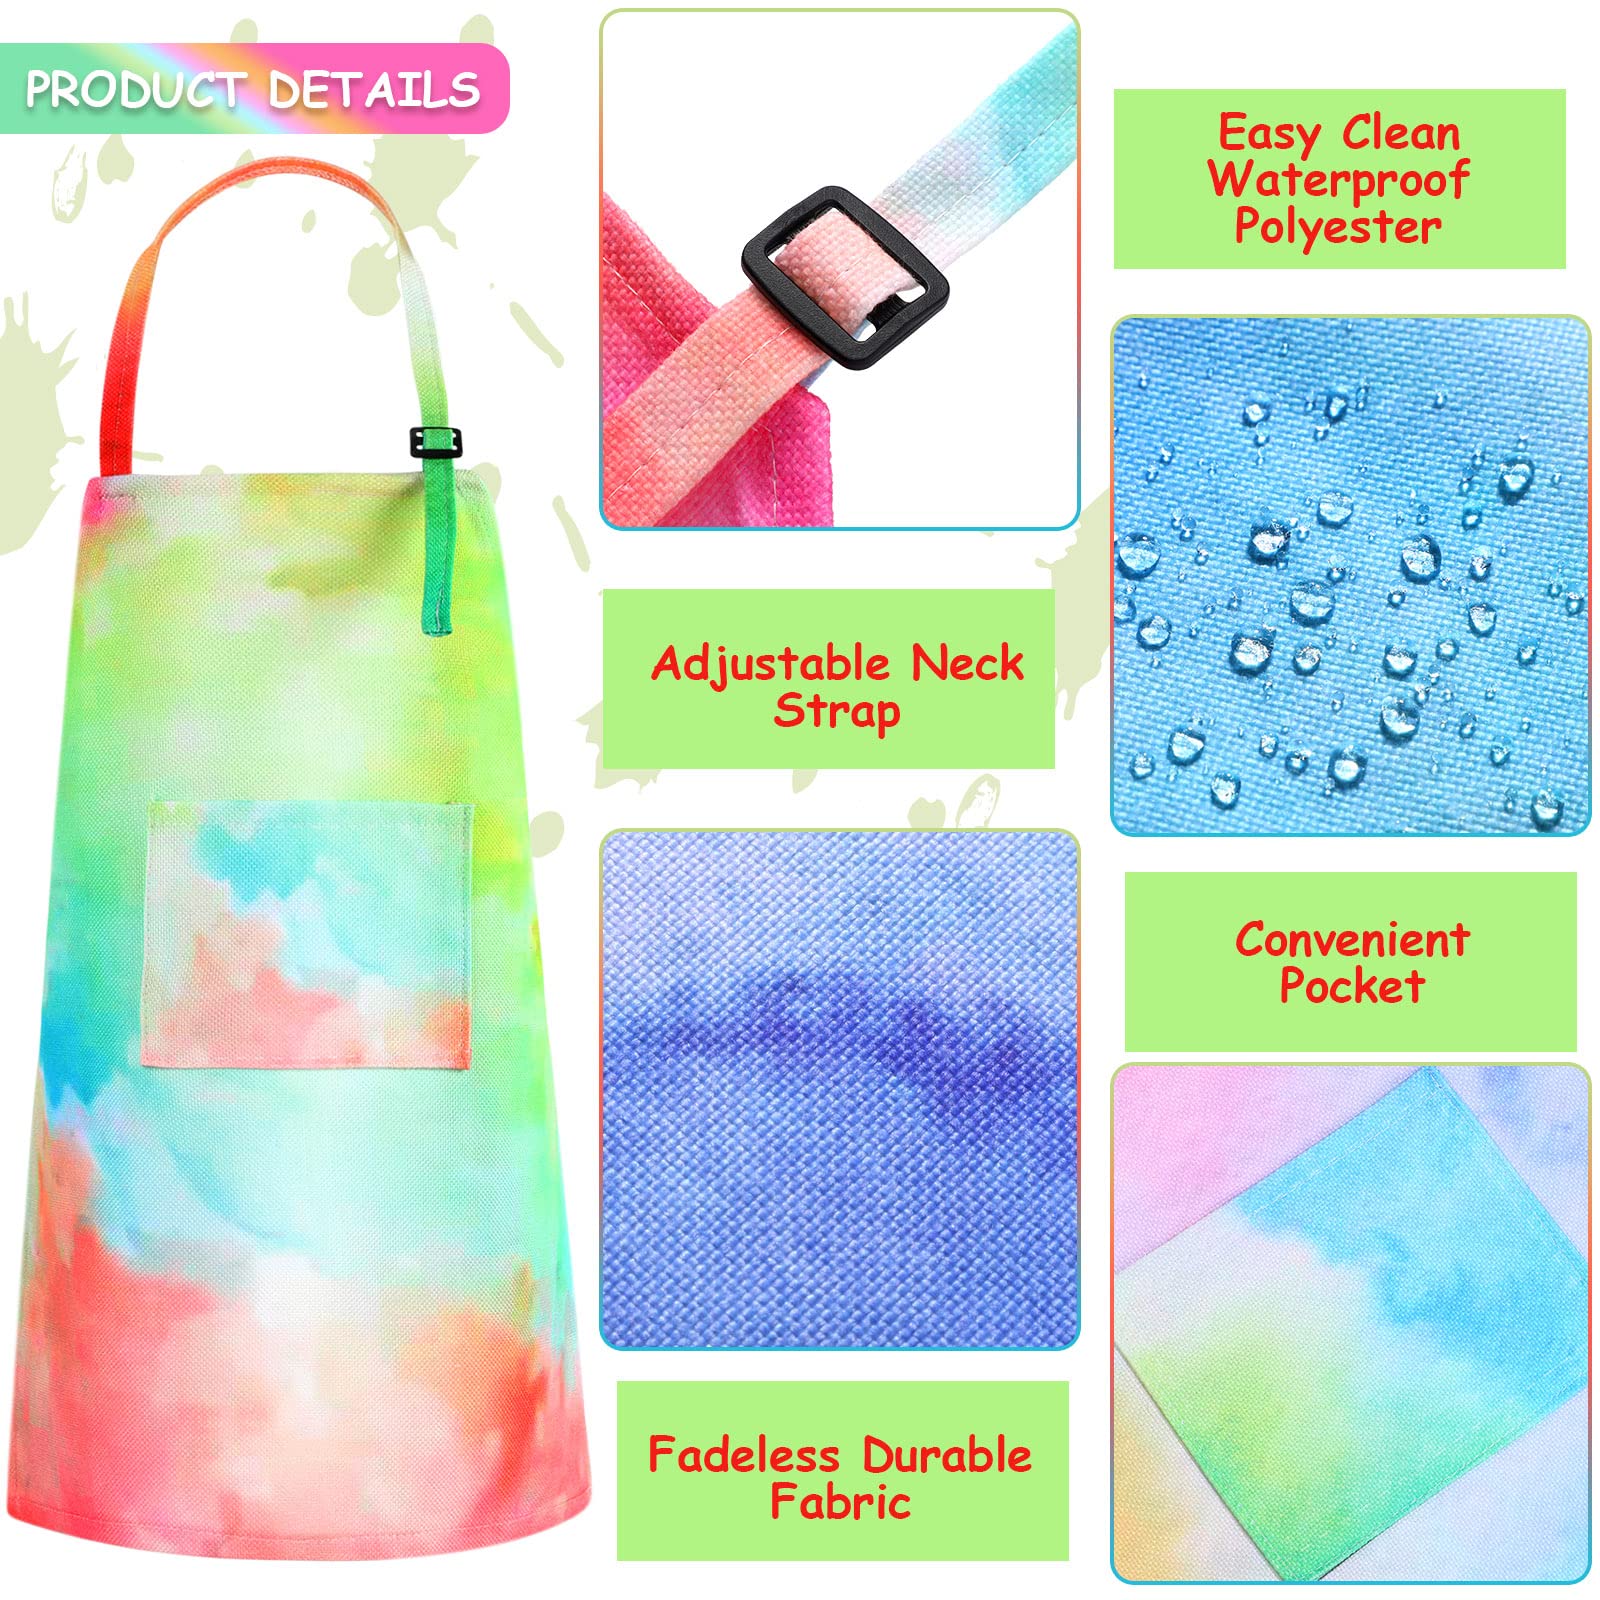 3 Pieces Tie Dye Art Apron For Kids Adjustable Painting Apron Cute Kids Cooking Aprons Artist Tie Dye Apron With Pocket For Child Home Kindergarten Party Supplies Apron For Boys Girls, 3 Styles